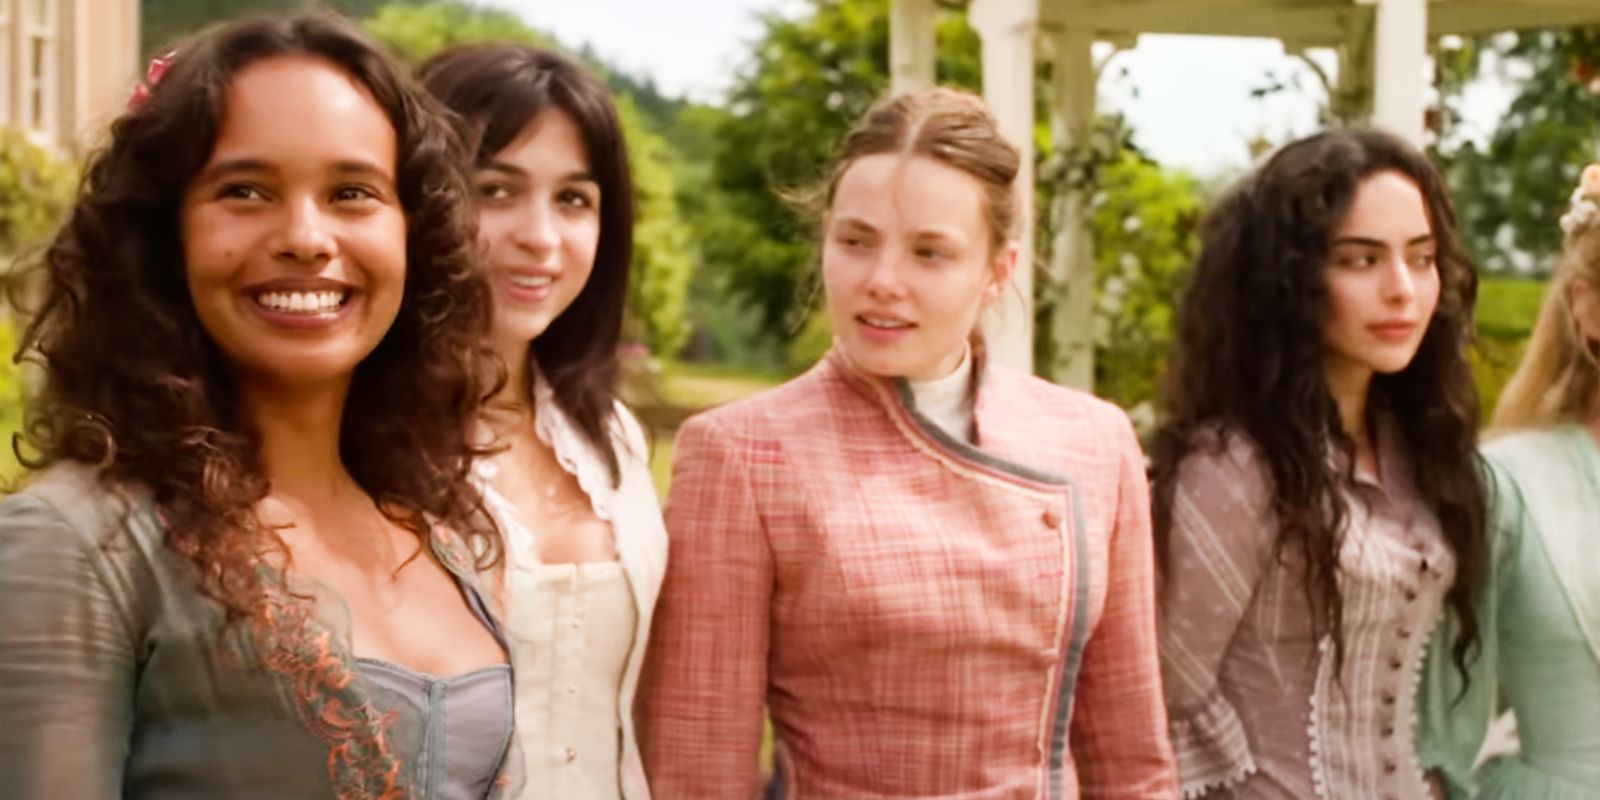 New Period Drama Will Be Perfect For Those Looking For The Next Bridgerton Fix